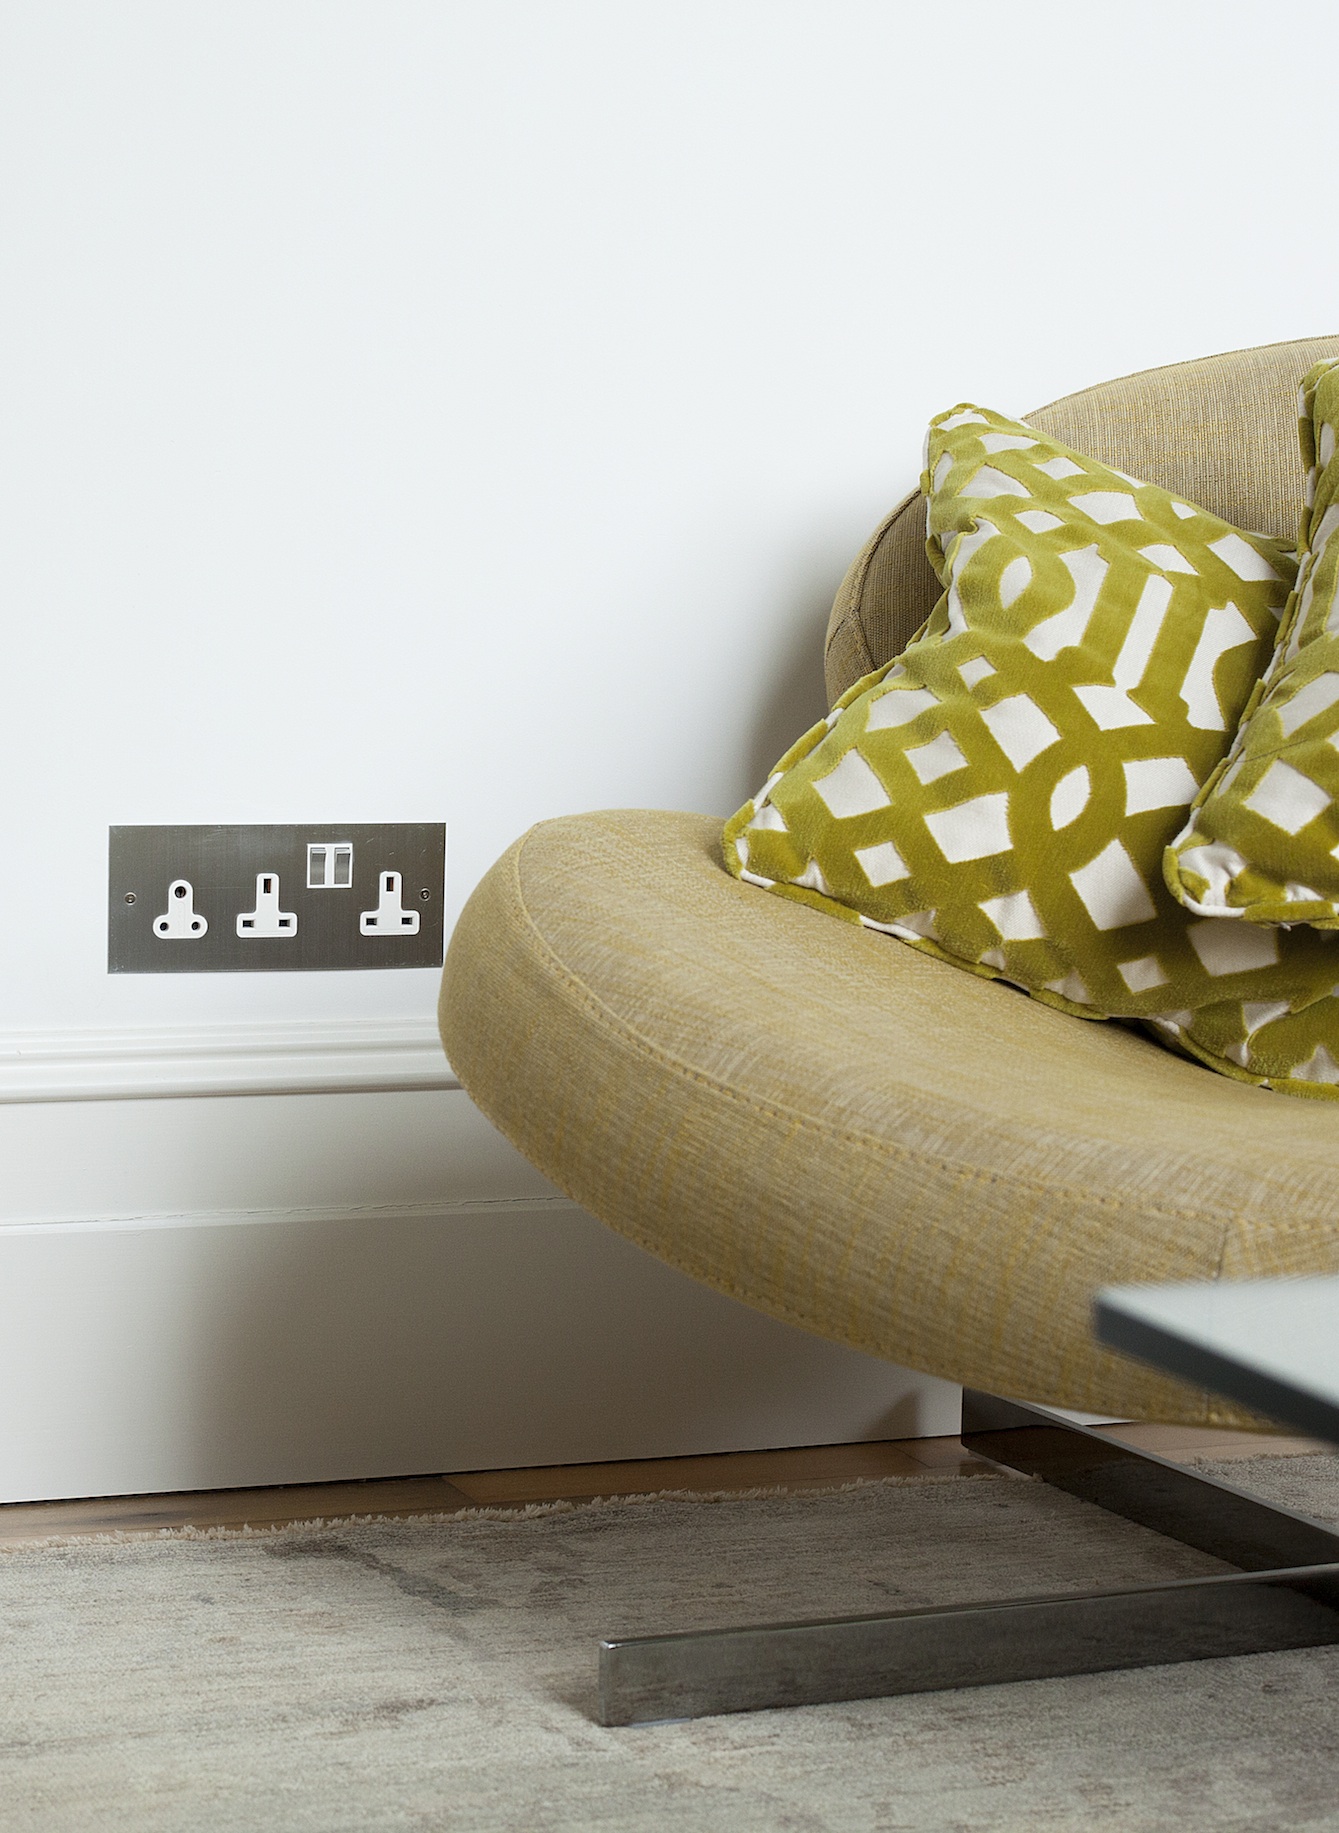 Bespoke switch plate specified by designer Audrey Lovelock for Lansdowne House. The plate design features two double sockets plus 5 amp lamp socket.